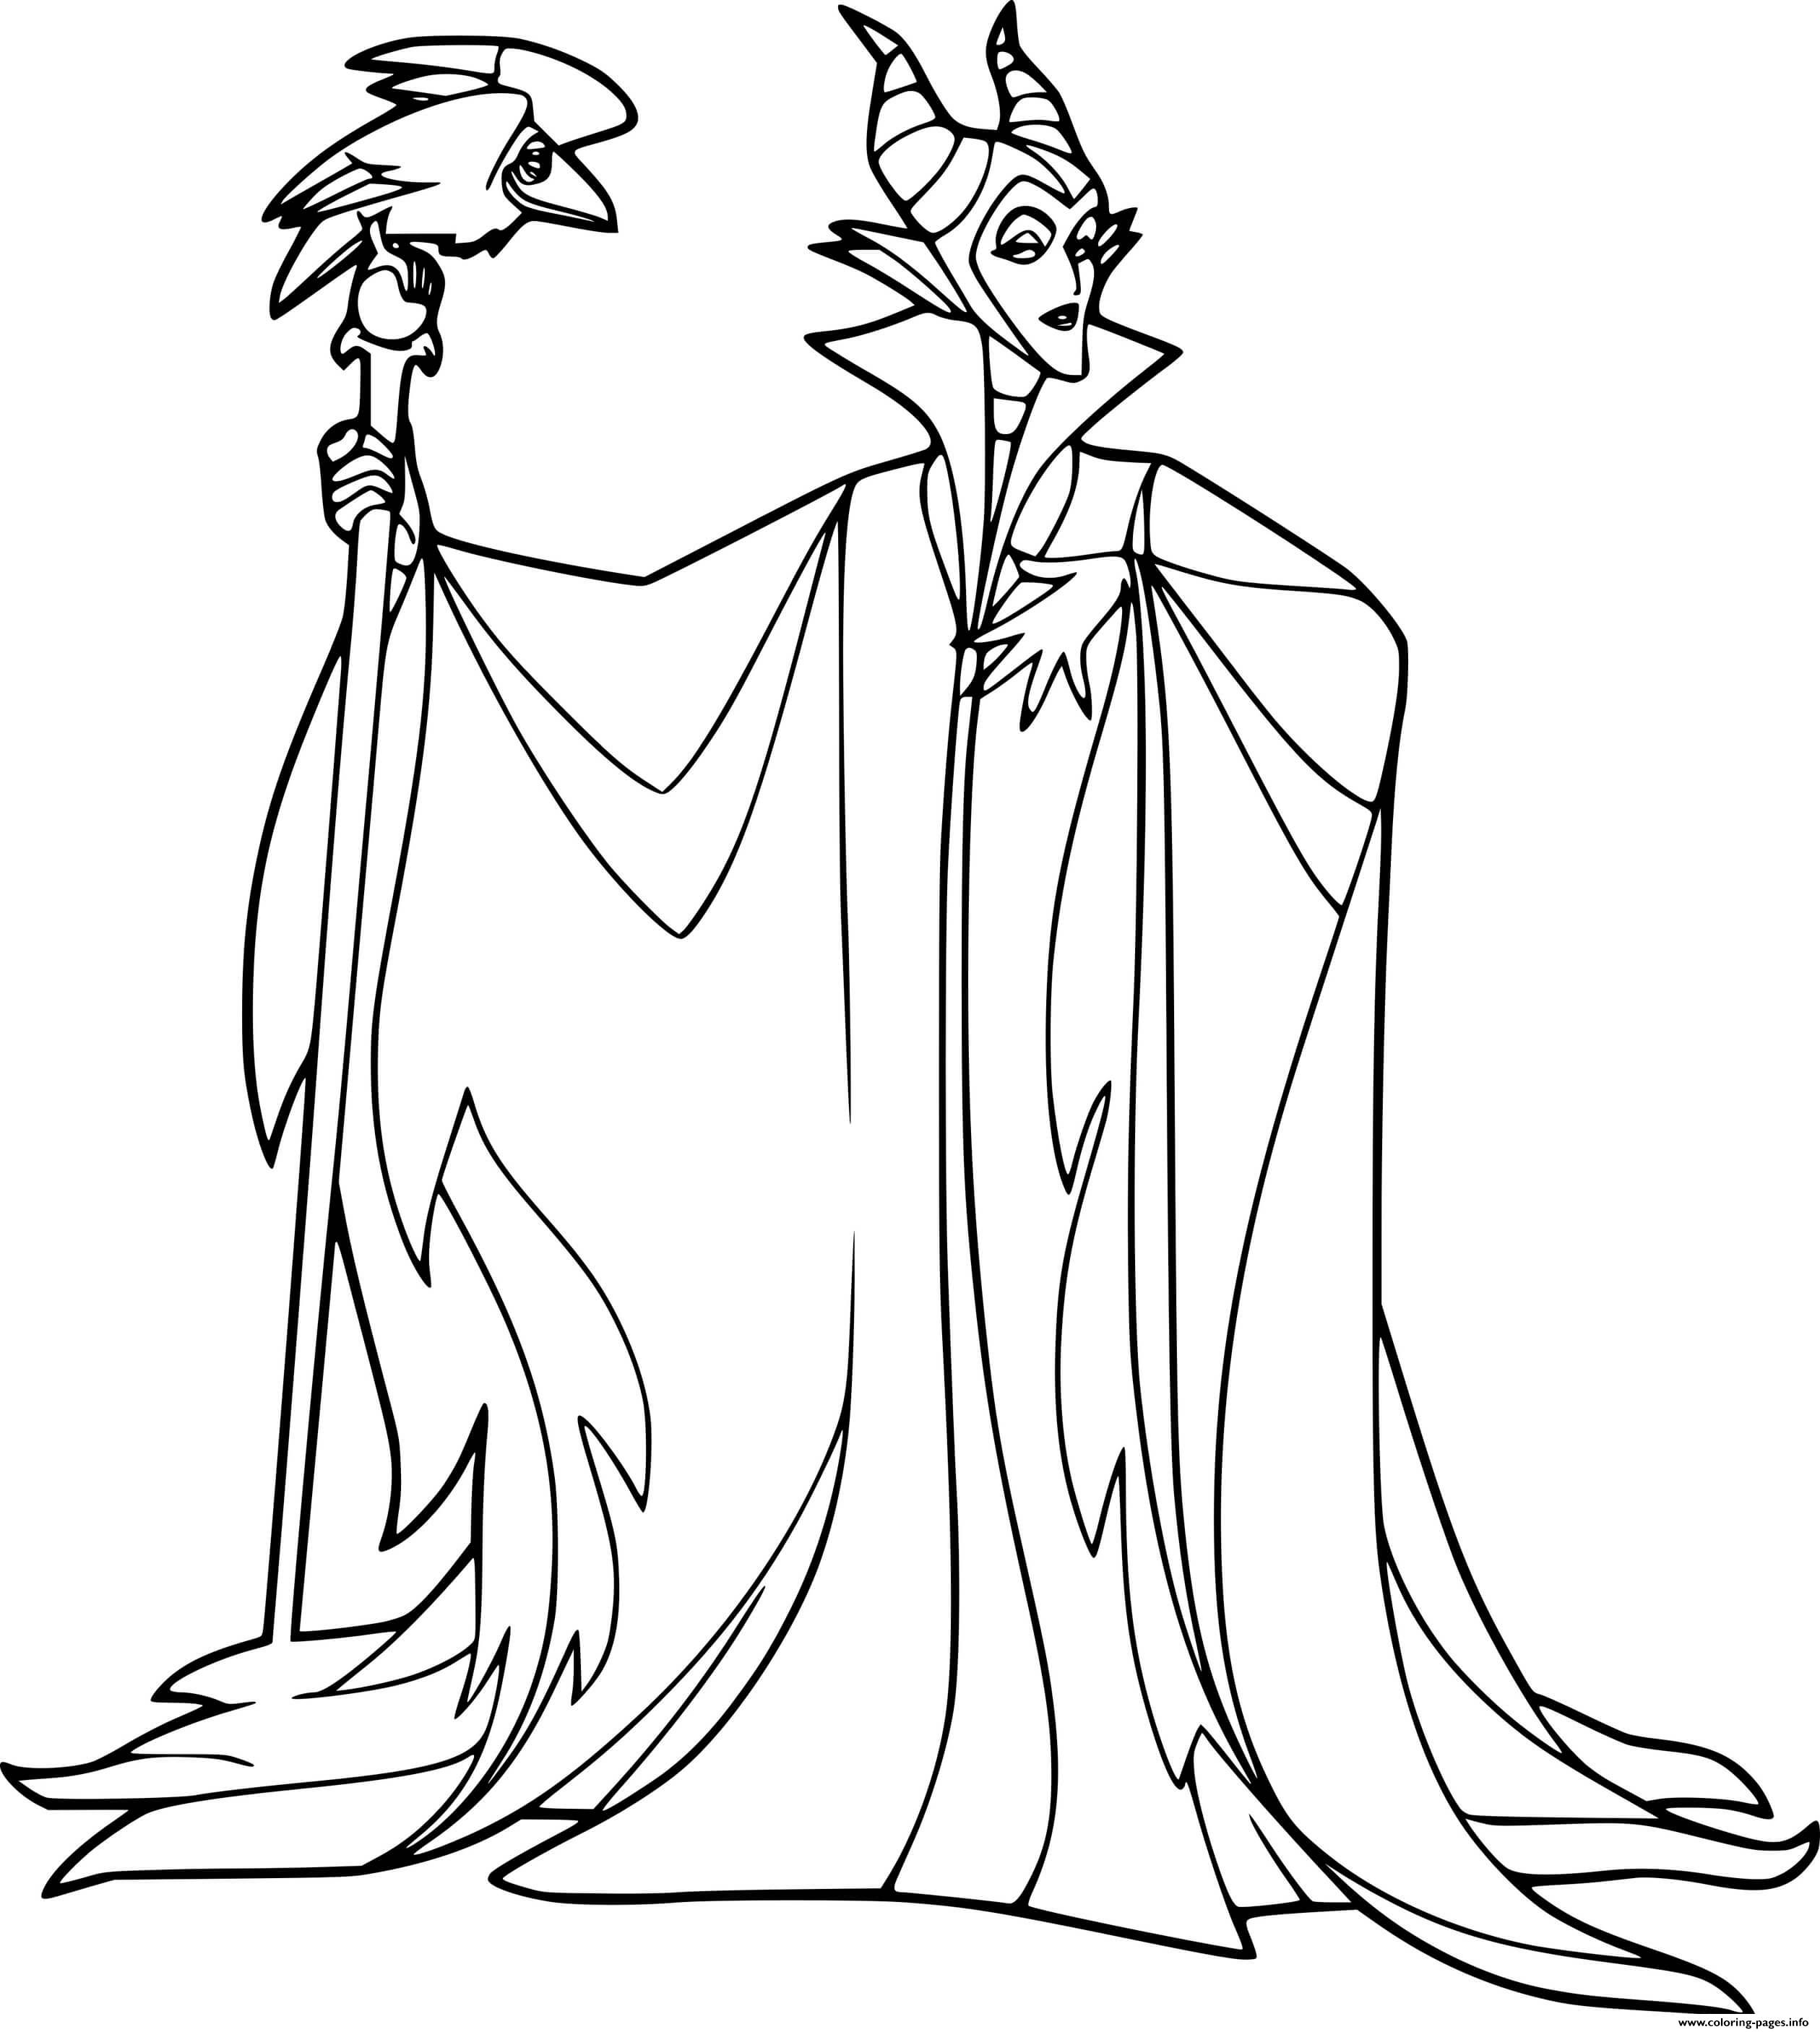 Maleficent From Sleeping Beauty Coloring page Printable